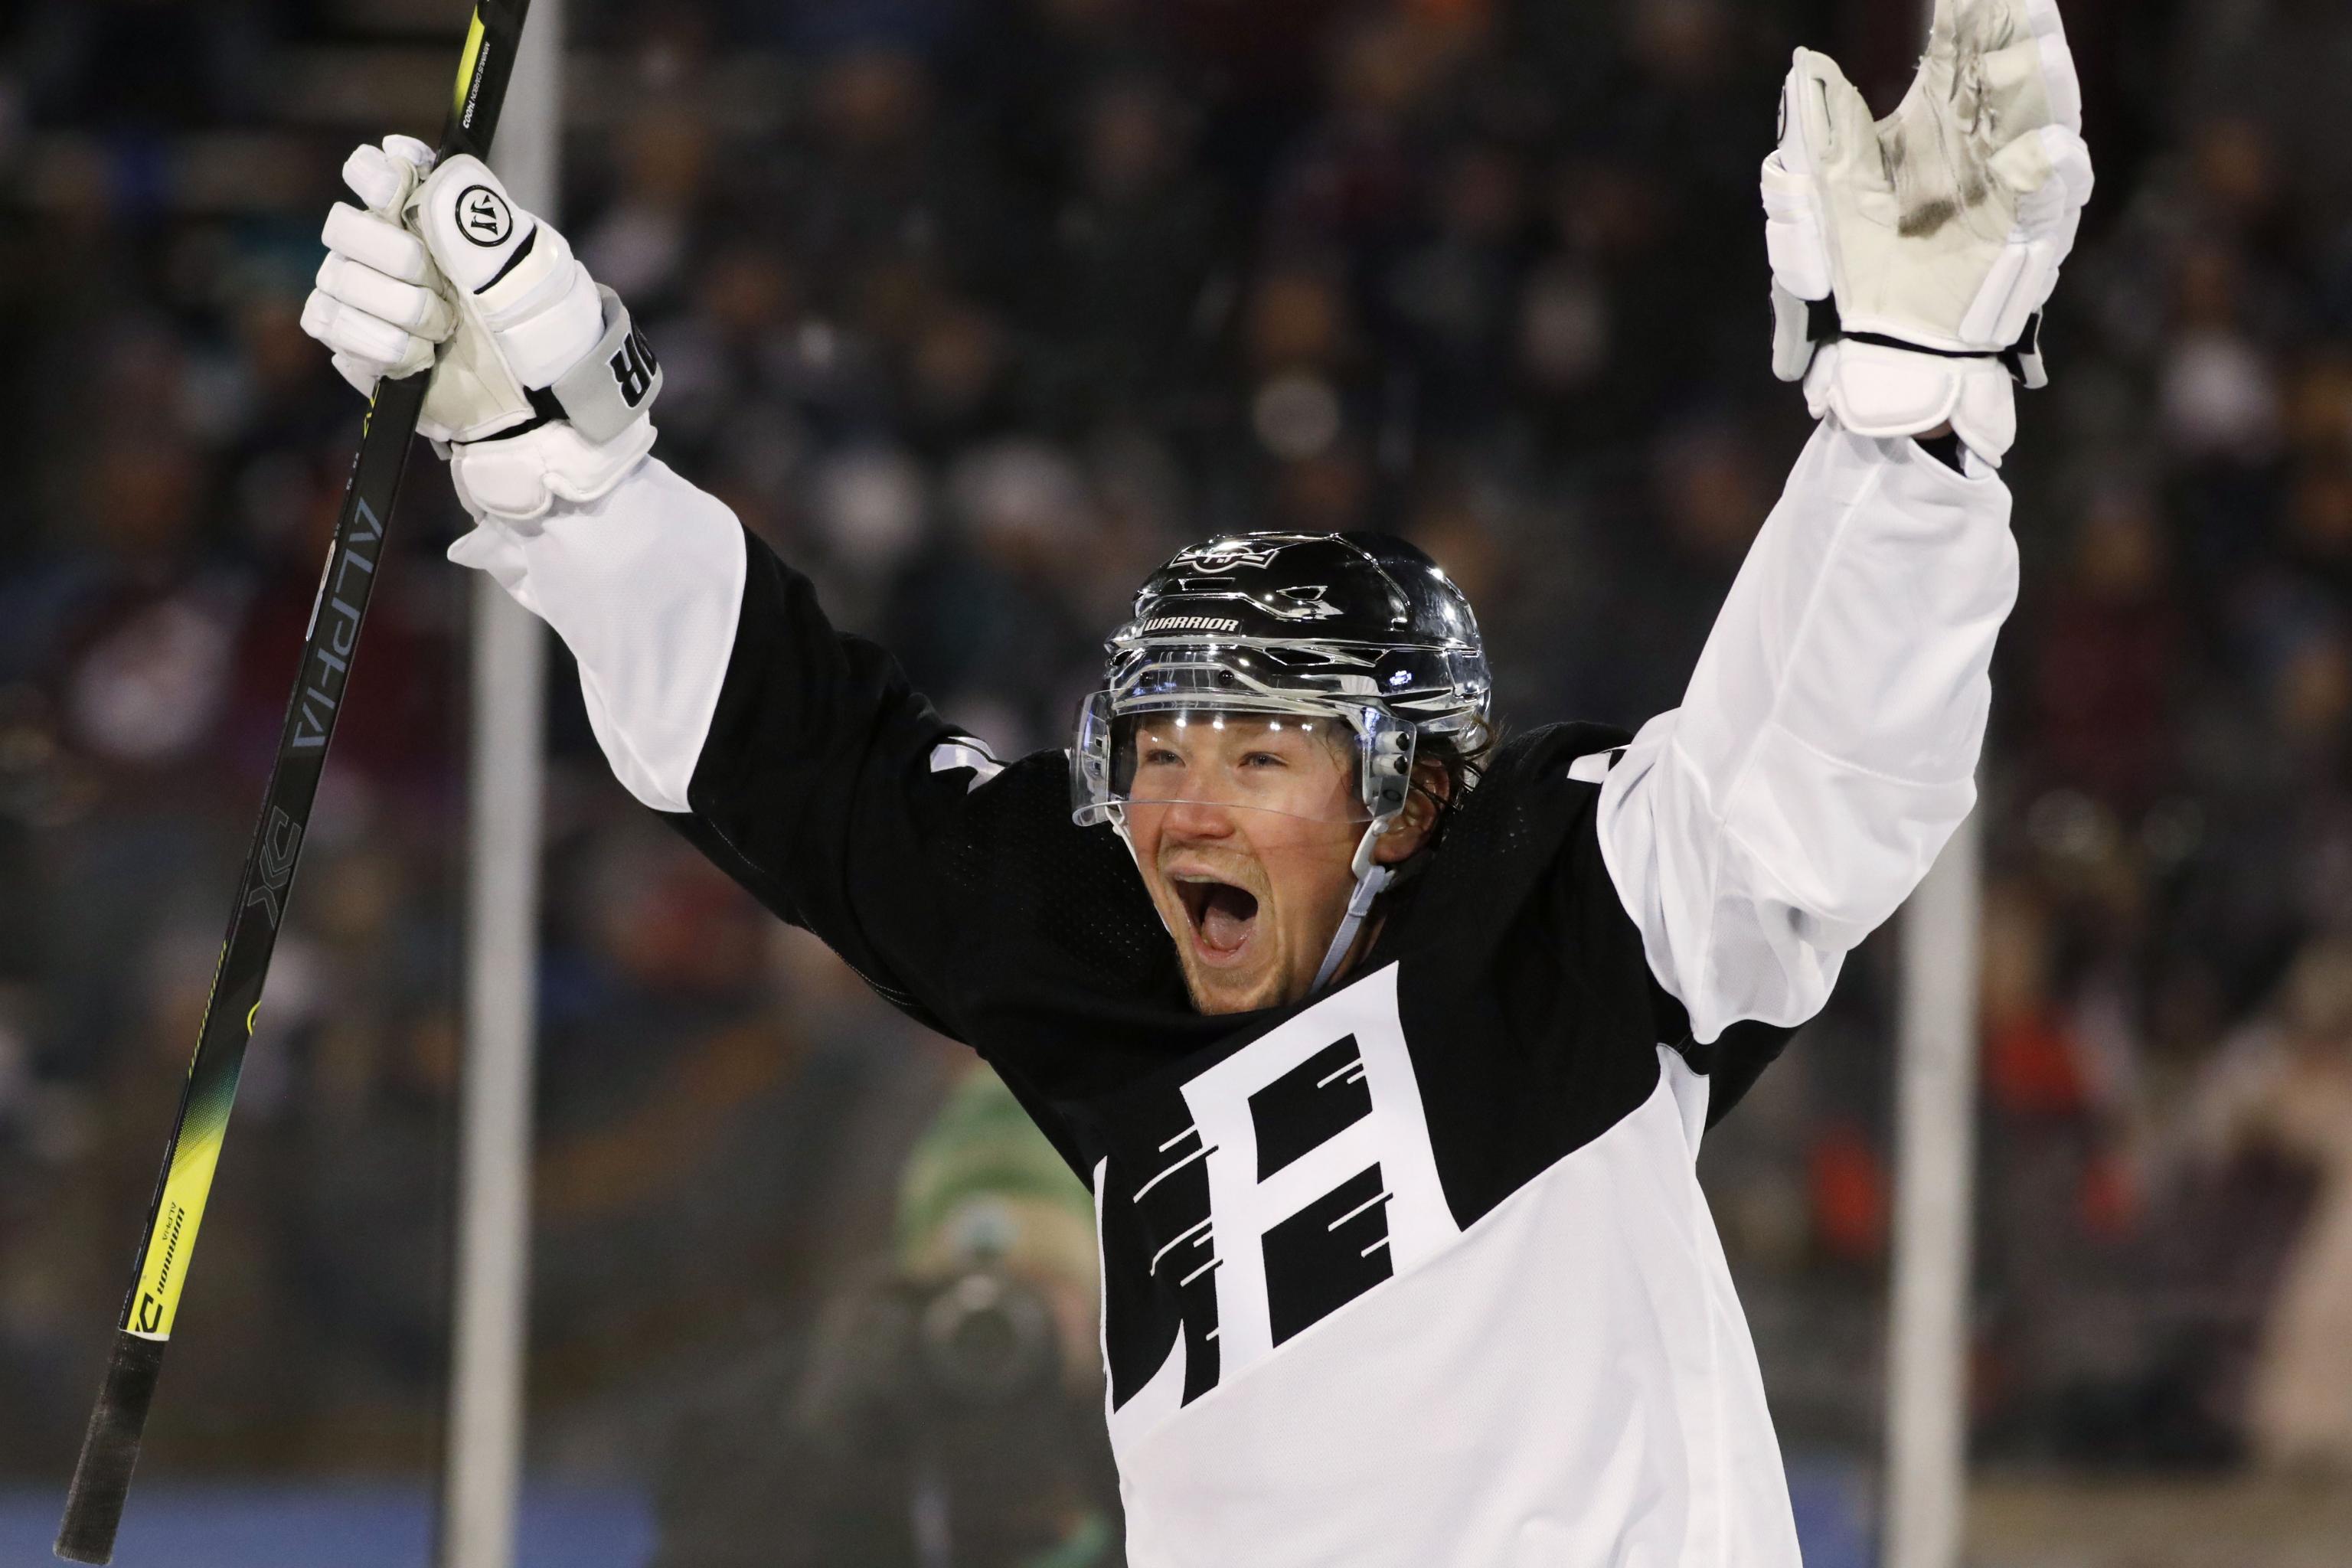 Los Angeles Kings: 3 Teams That Should Trade for Tyler Toffoli